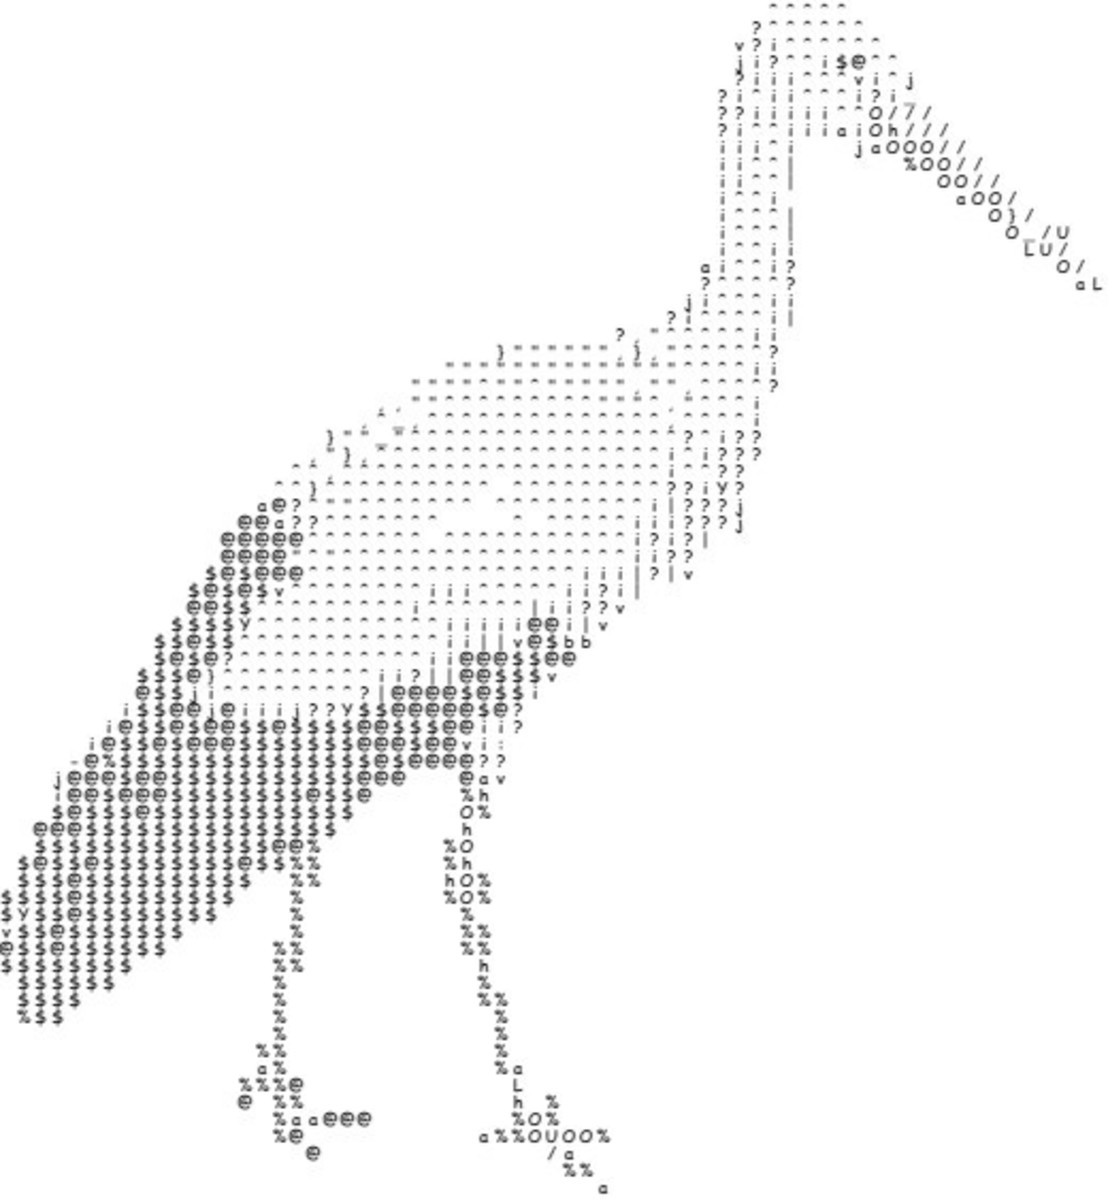 Classic ASCII image created with an image to ASCII converter app.